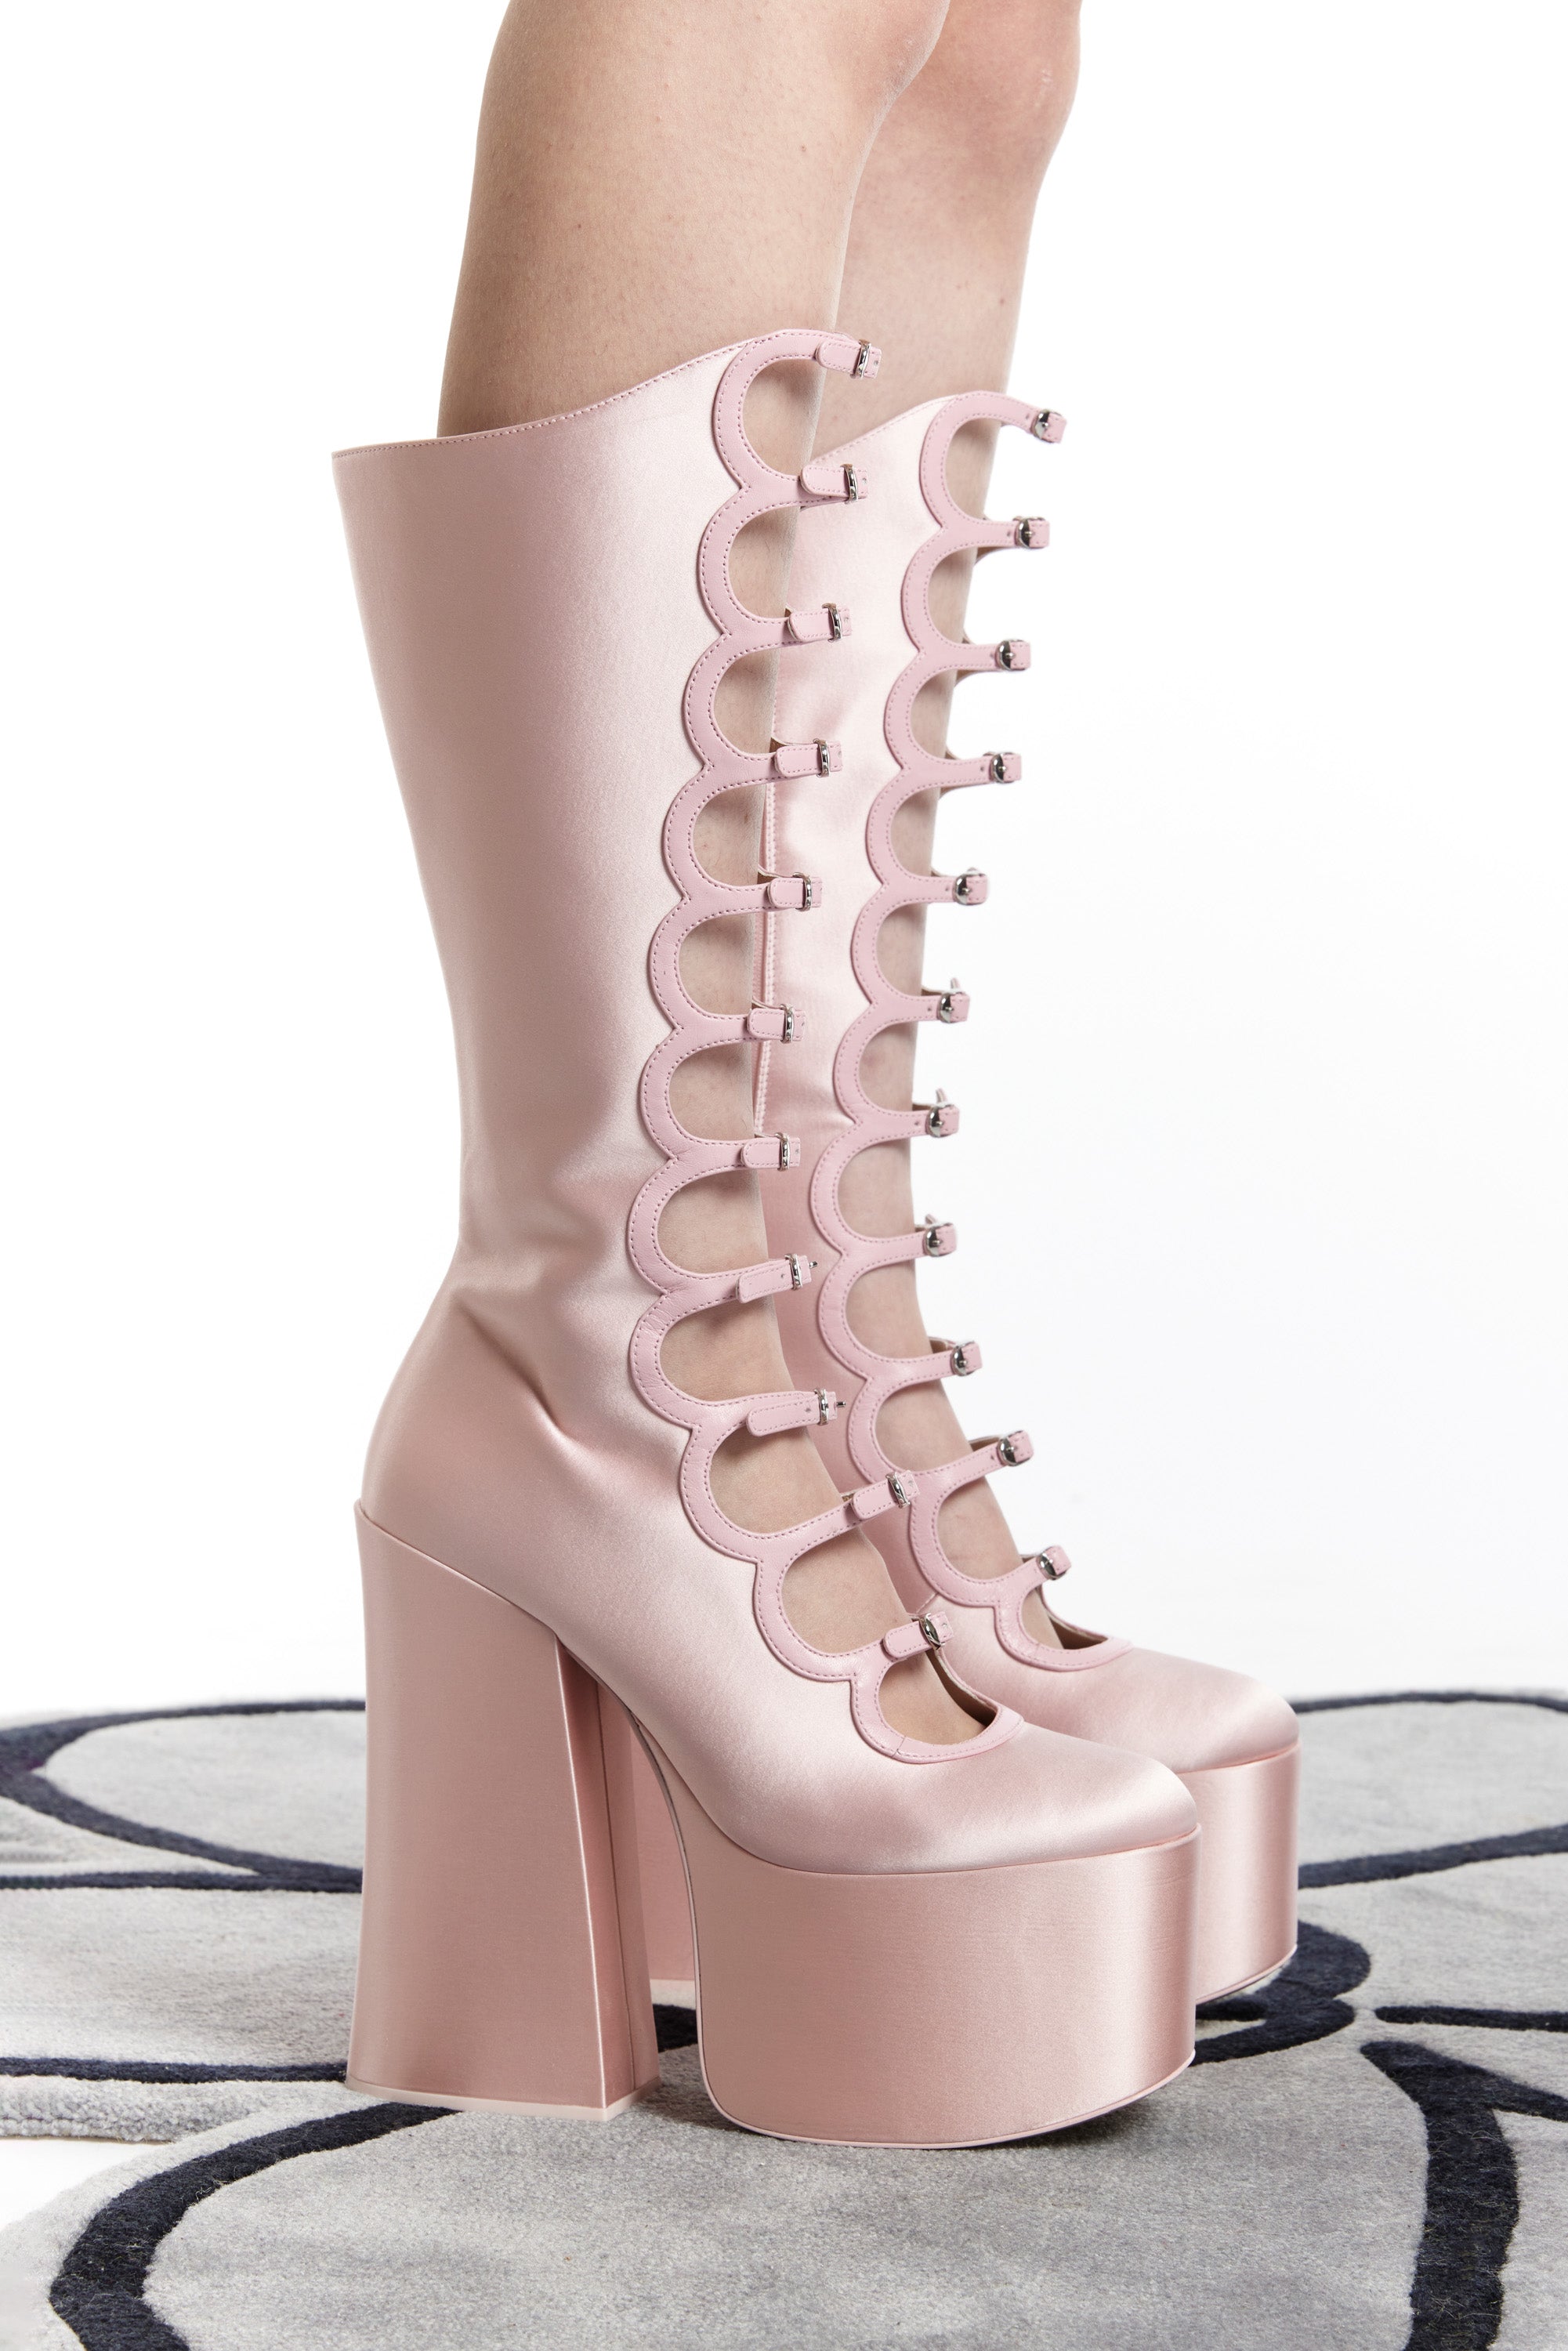 The HEAVEN - SATIN MULTI BUCKLE KIKI BOOT  available online with global shipping, and in PAM Stores Melbourne and Sydney.